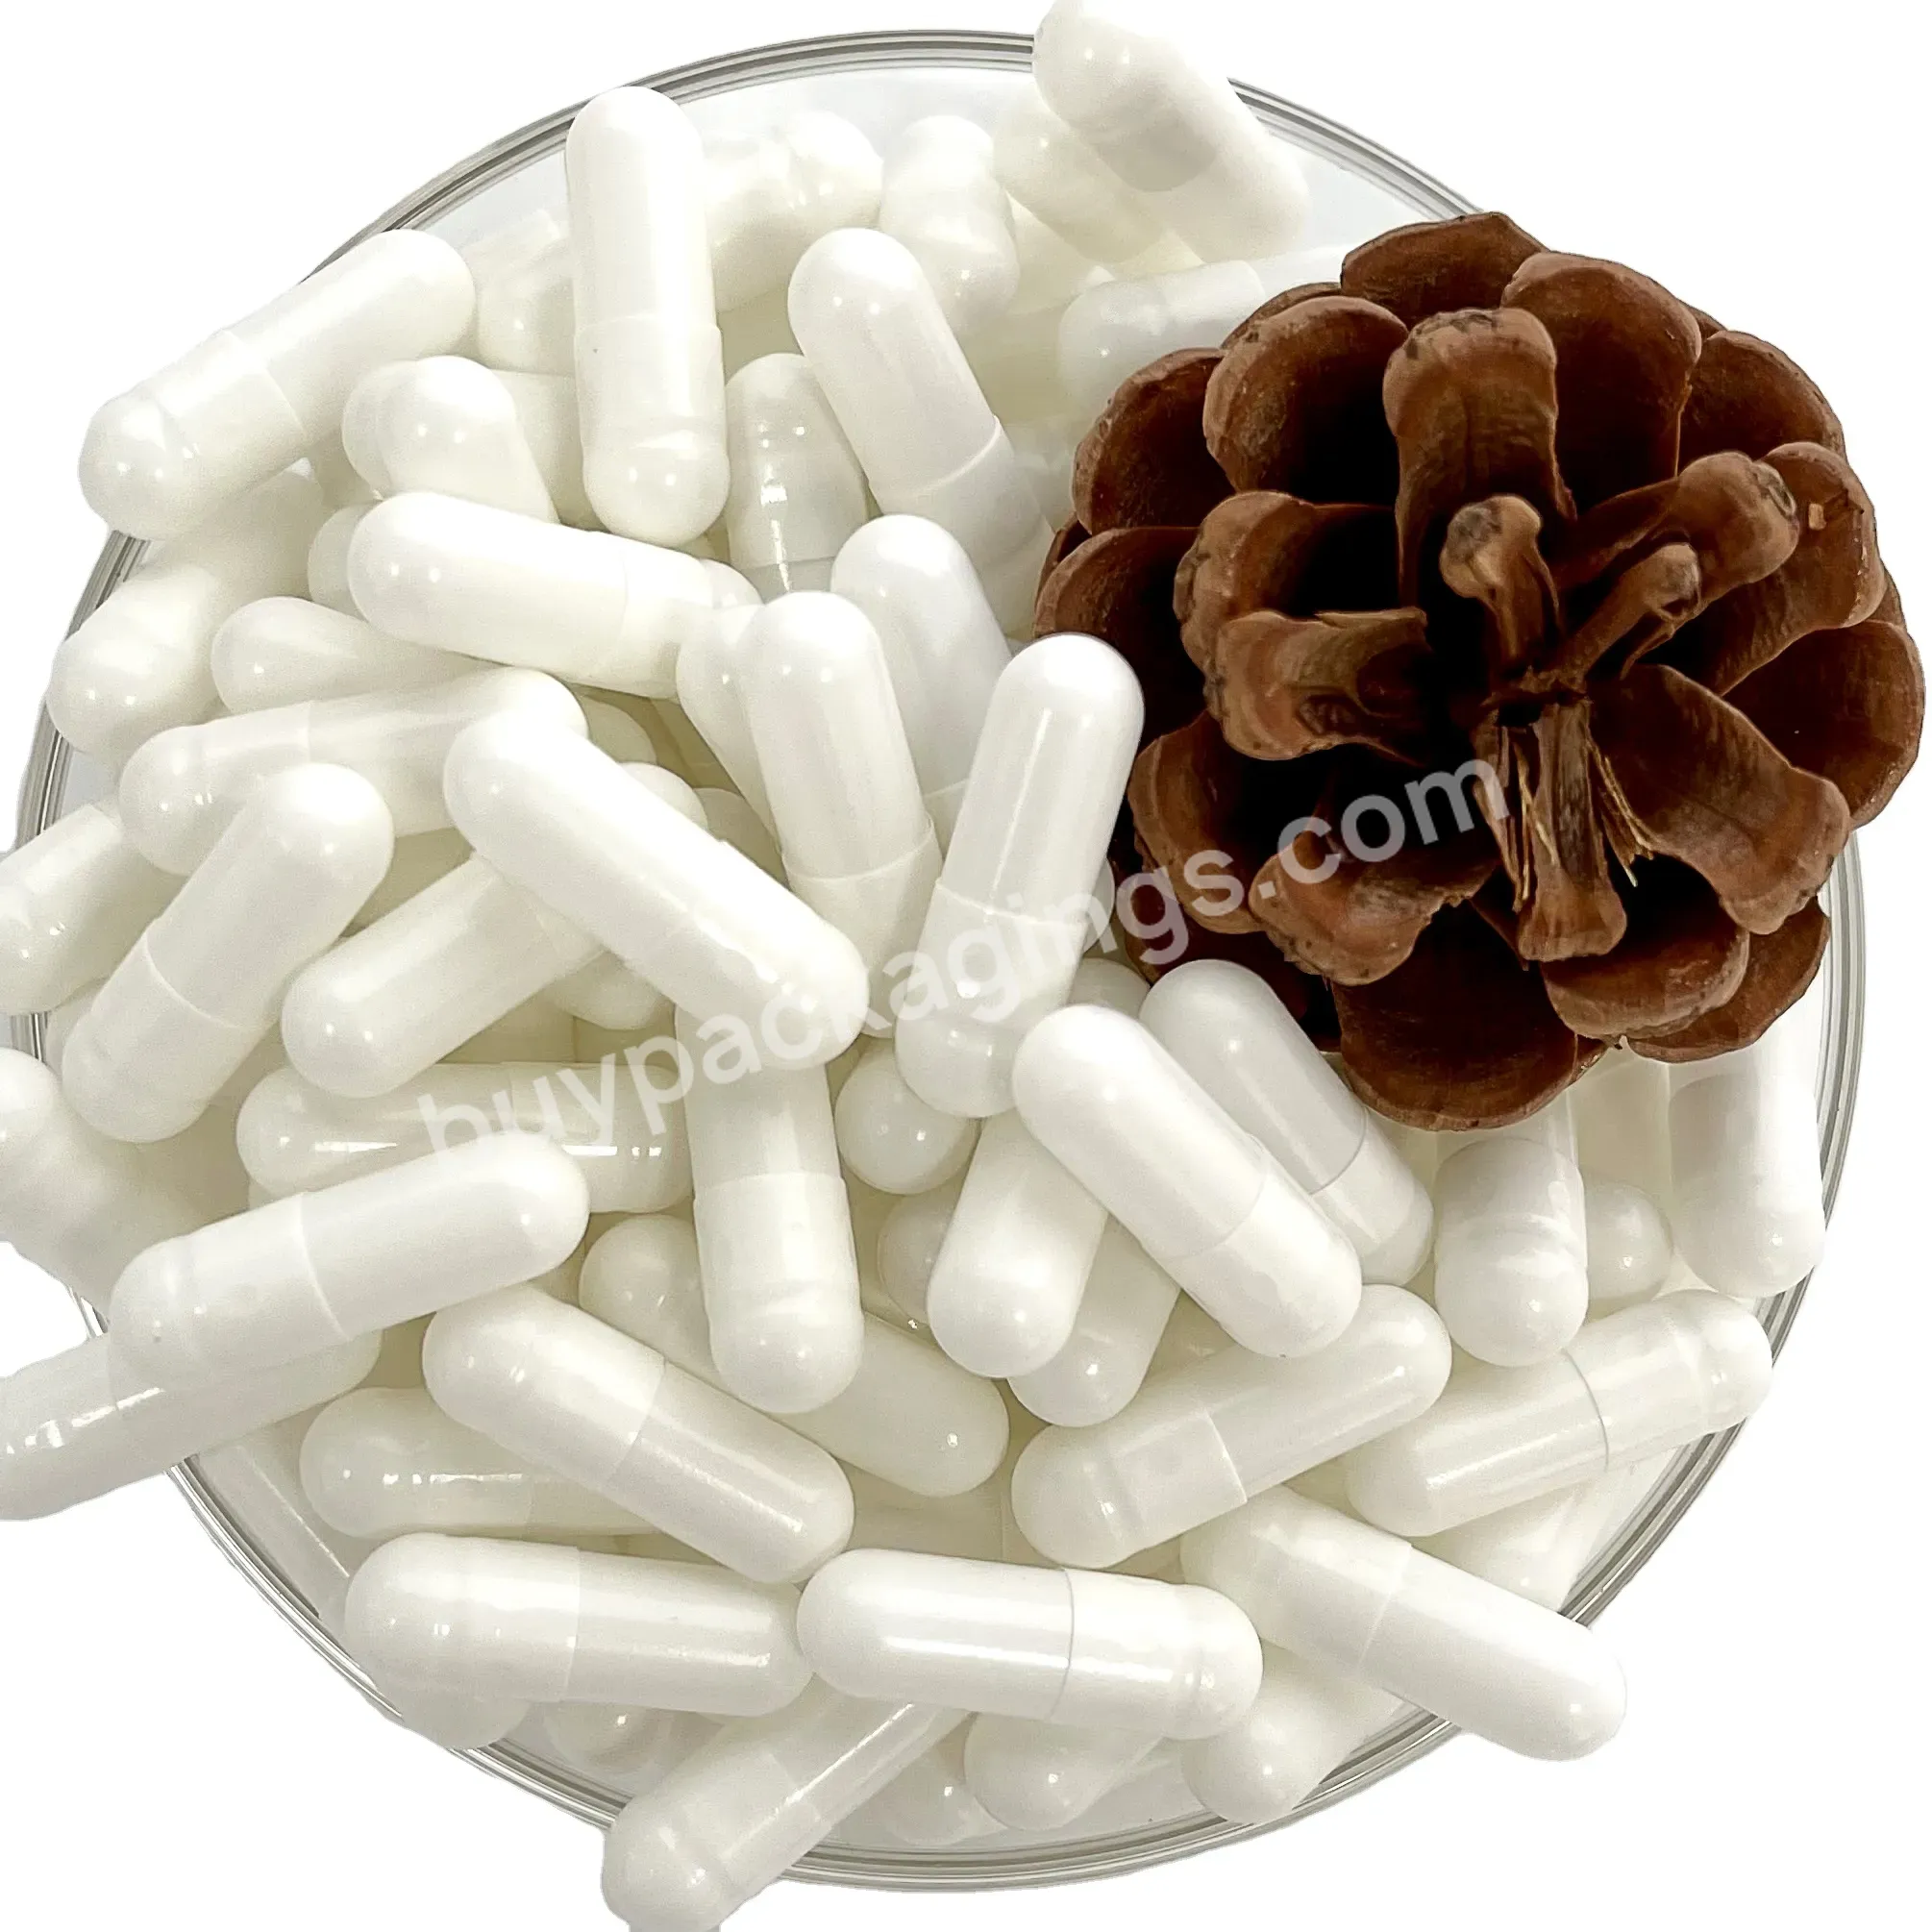 Wholesale Size 000 00 0 1 2 3 4 5 Medicinal Halal Gelatin Capsules Different Colors Or Hpmc Capsules - Buy Empty Gelatin Capsules Or Hpmc Capsules Size 00 0 1 2 3 4 5,Empty Gelatin Capsules Or Hpmc Capsules,Enteric Coated Capsule Empty Gelatin Capsules.